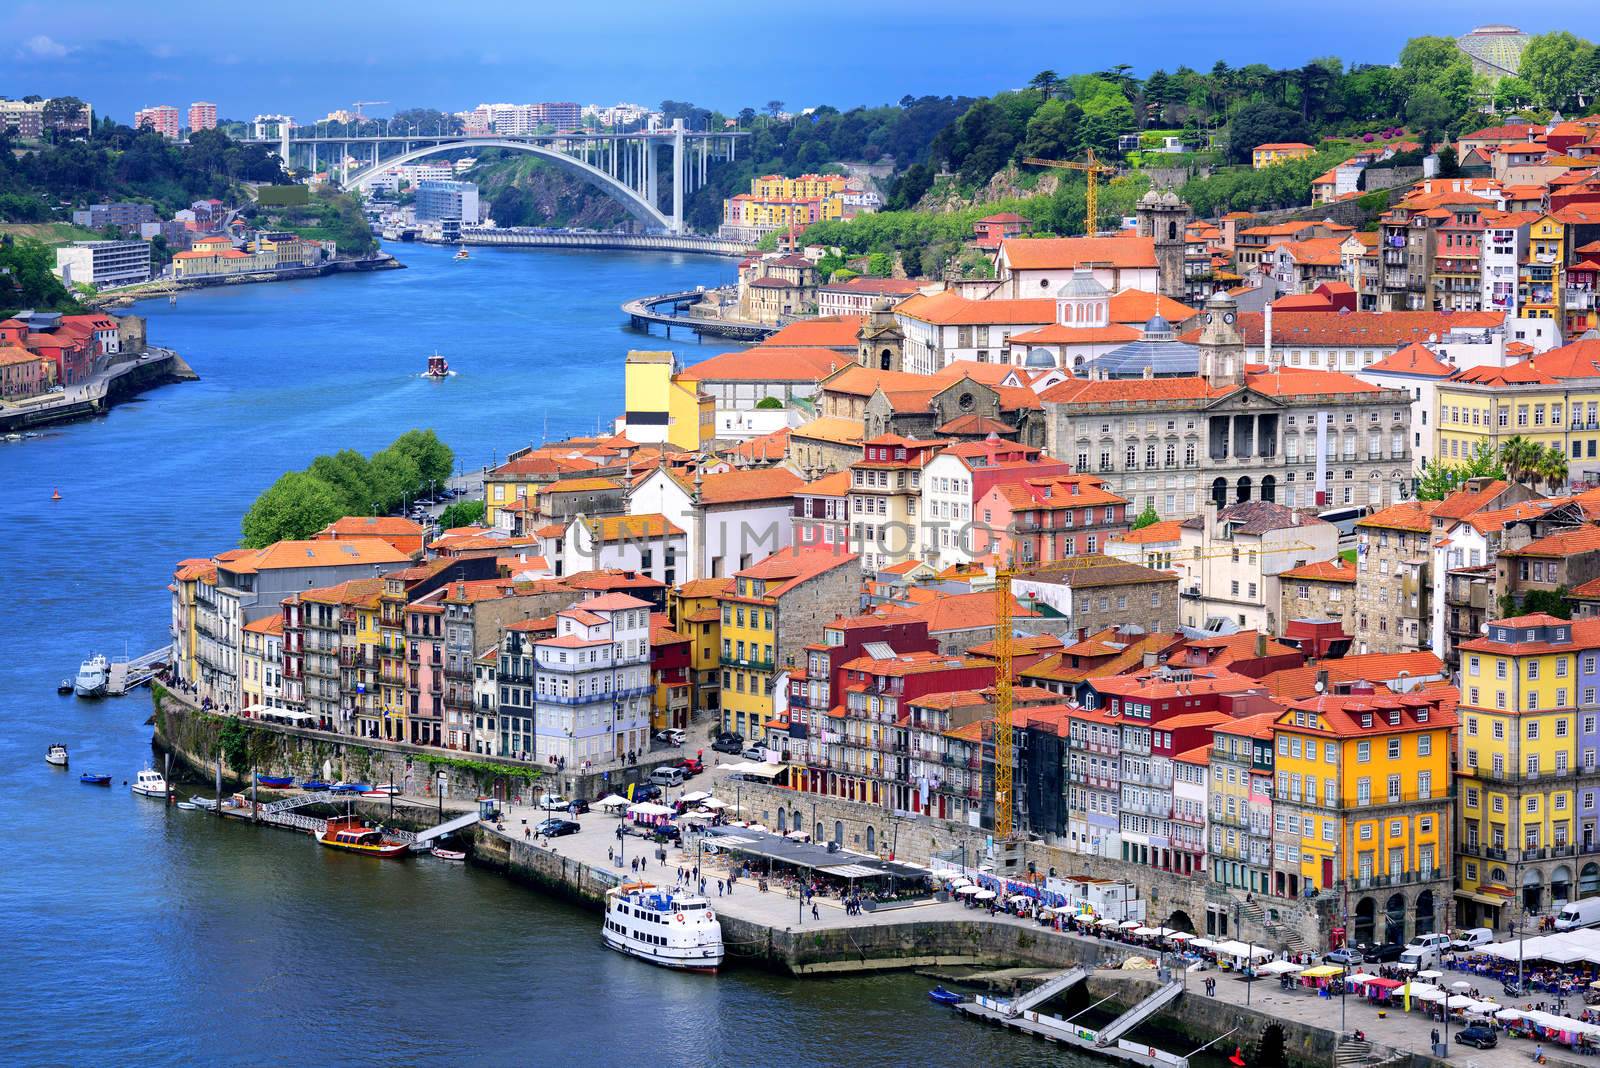 Ribeira, the old town of Porto, and the river Douro, Portugal by GlobePhotos